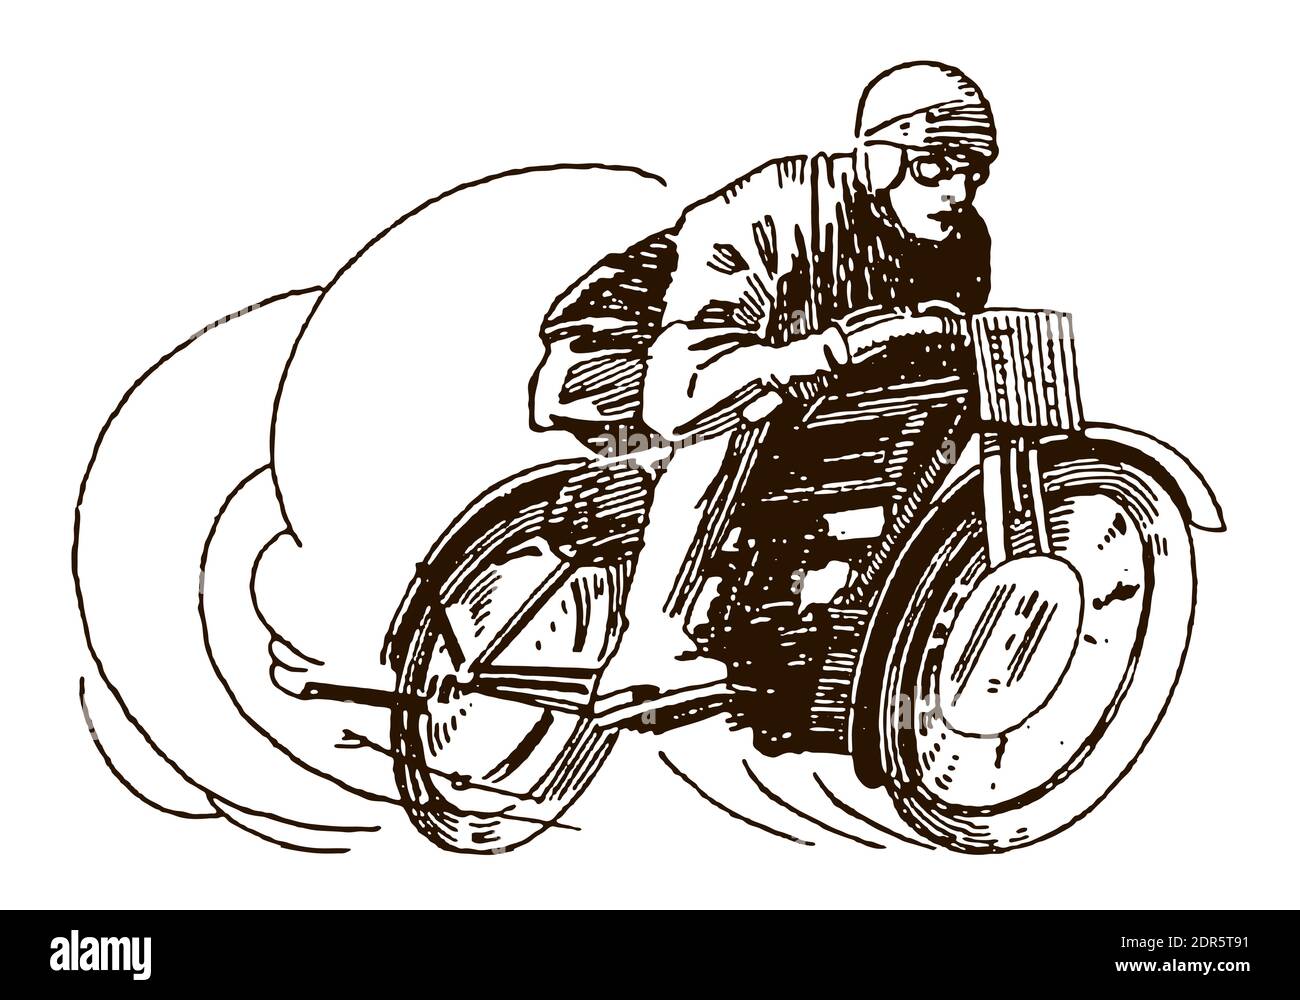 Antique racing motorcycle rider at high speed, after an illustration from the early 20th century Stock Vector